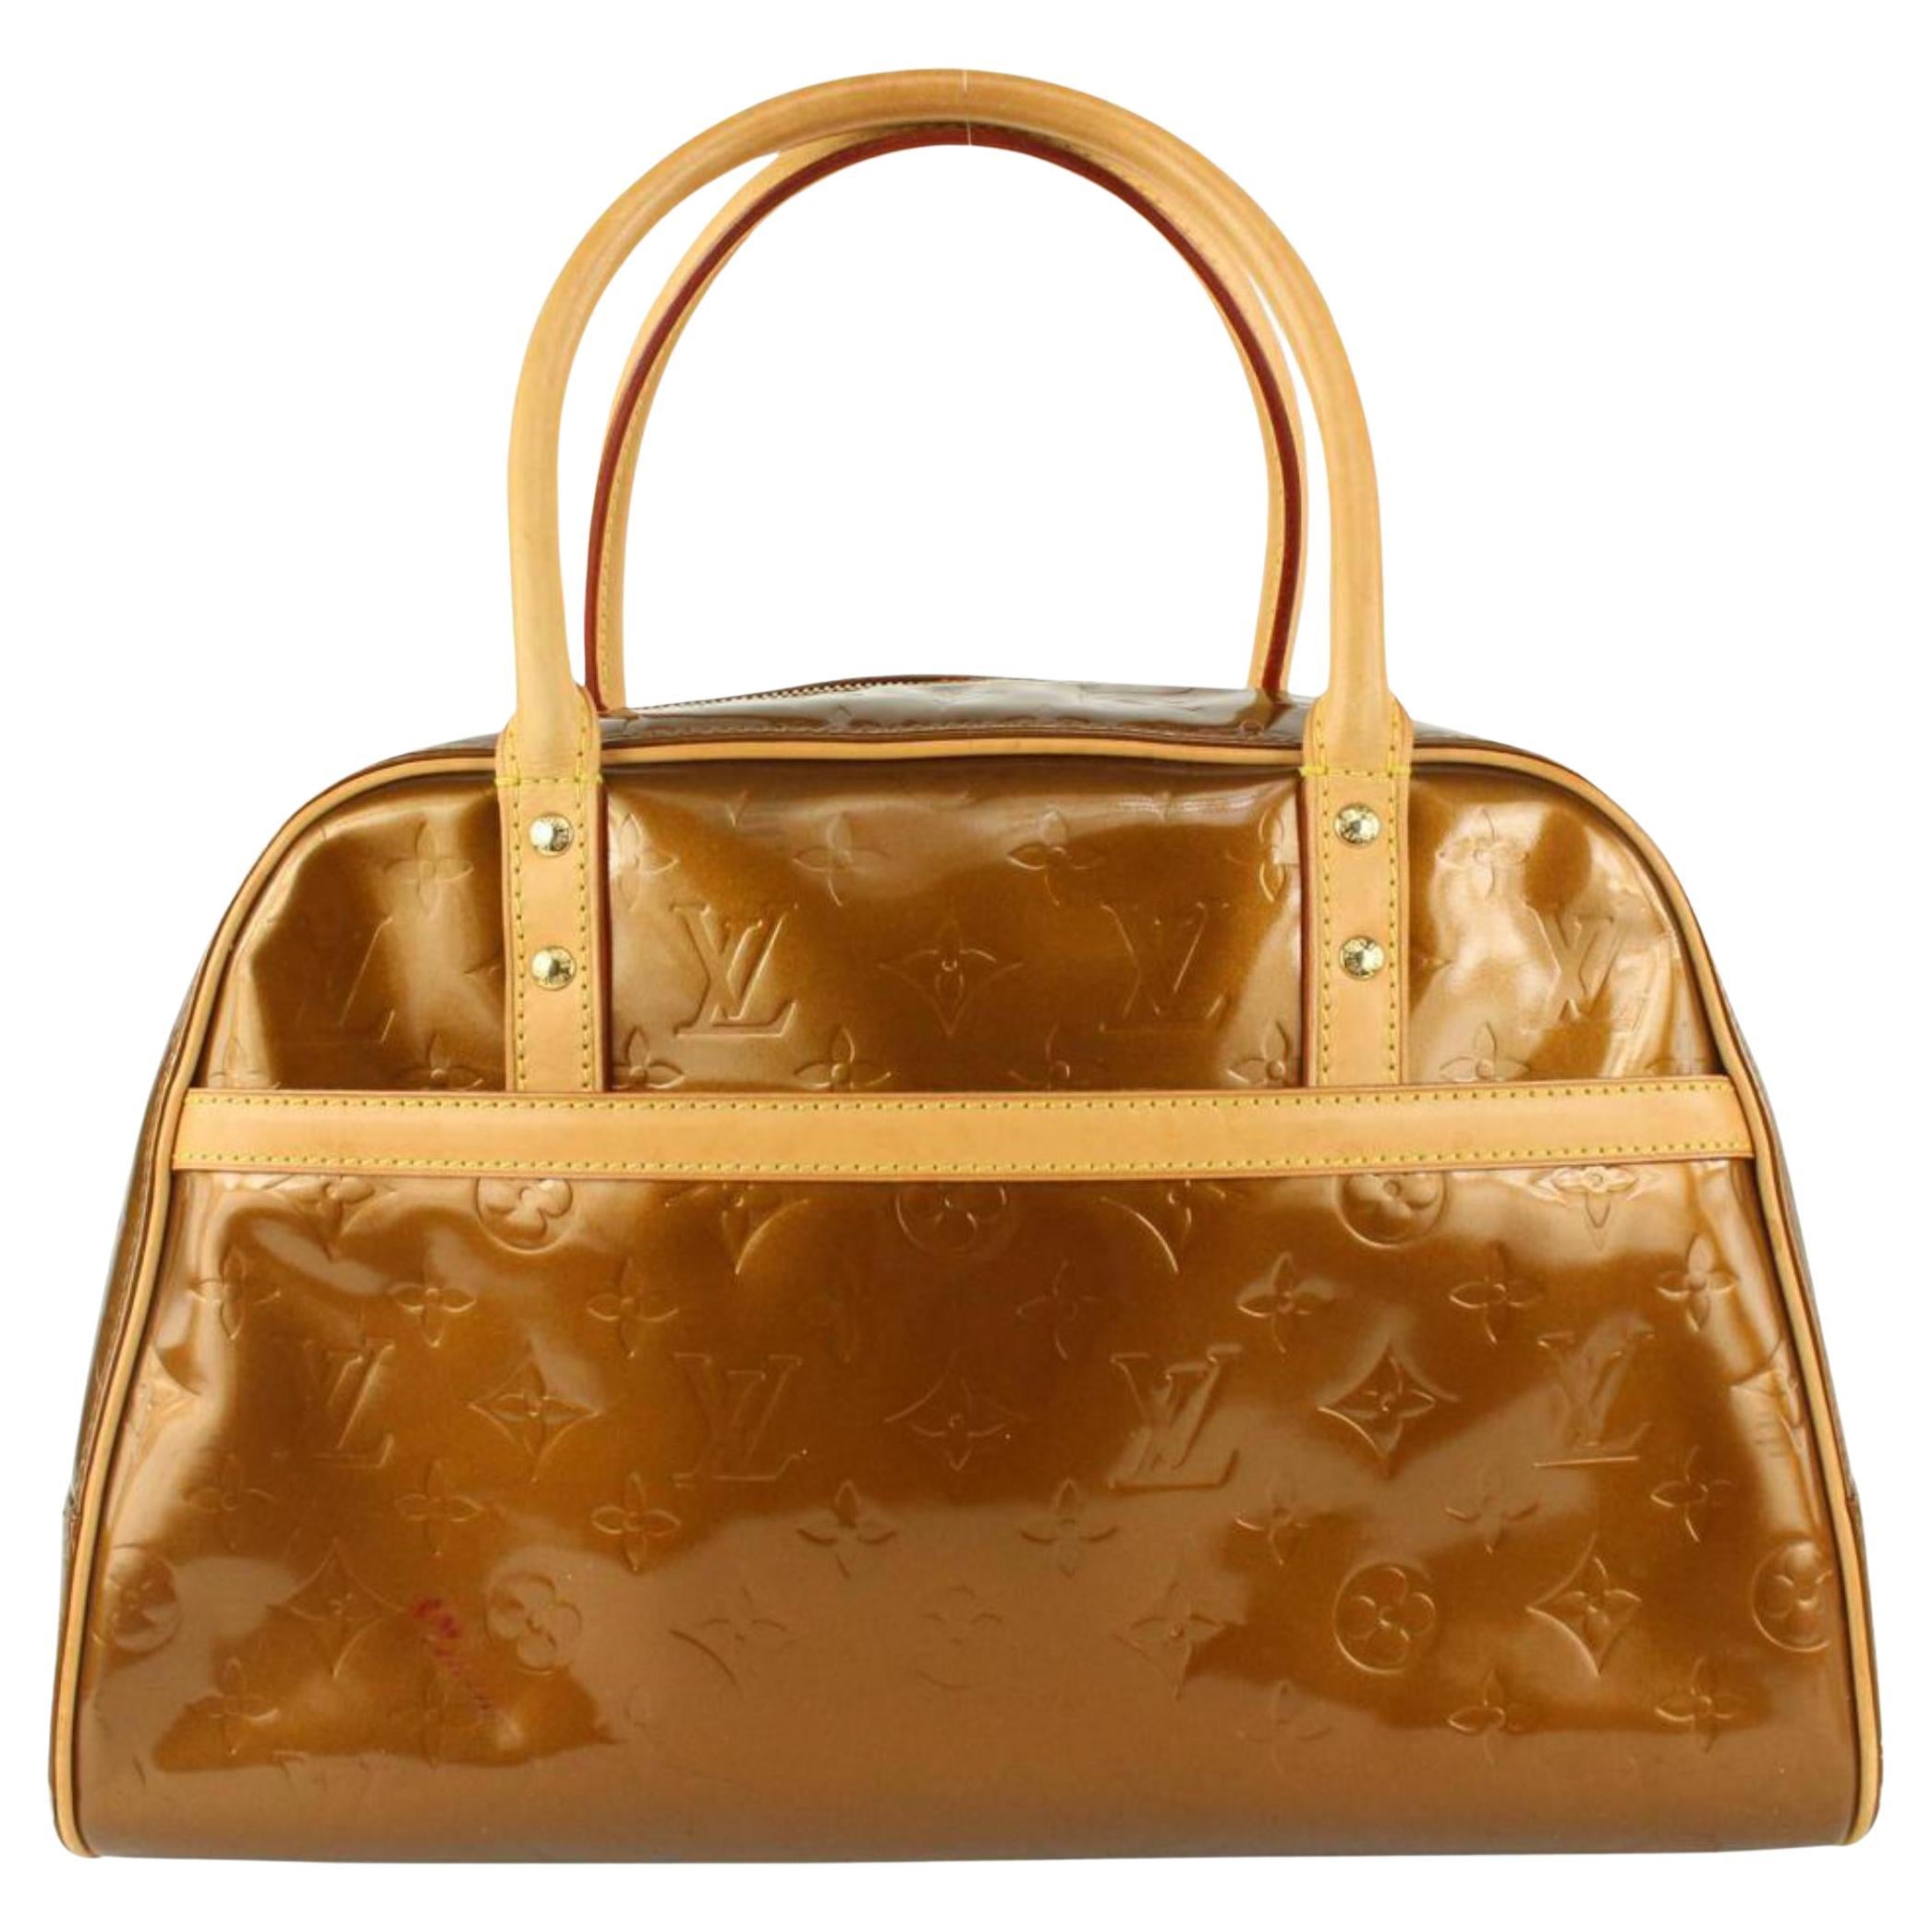 Louis Vuitton Square Bag, Brown, One Size